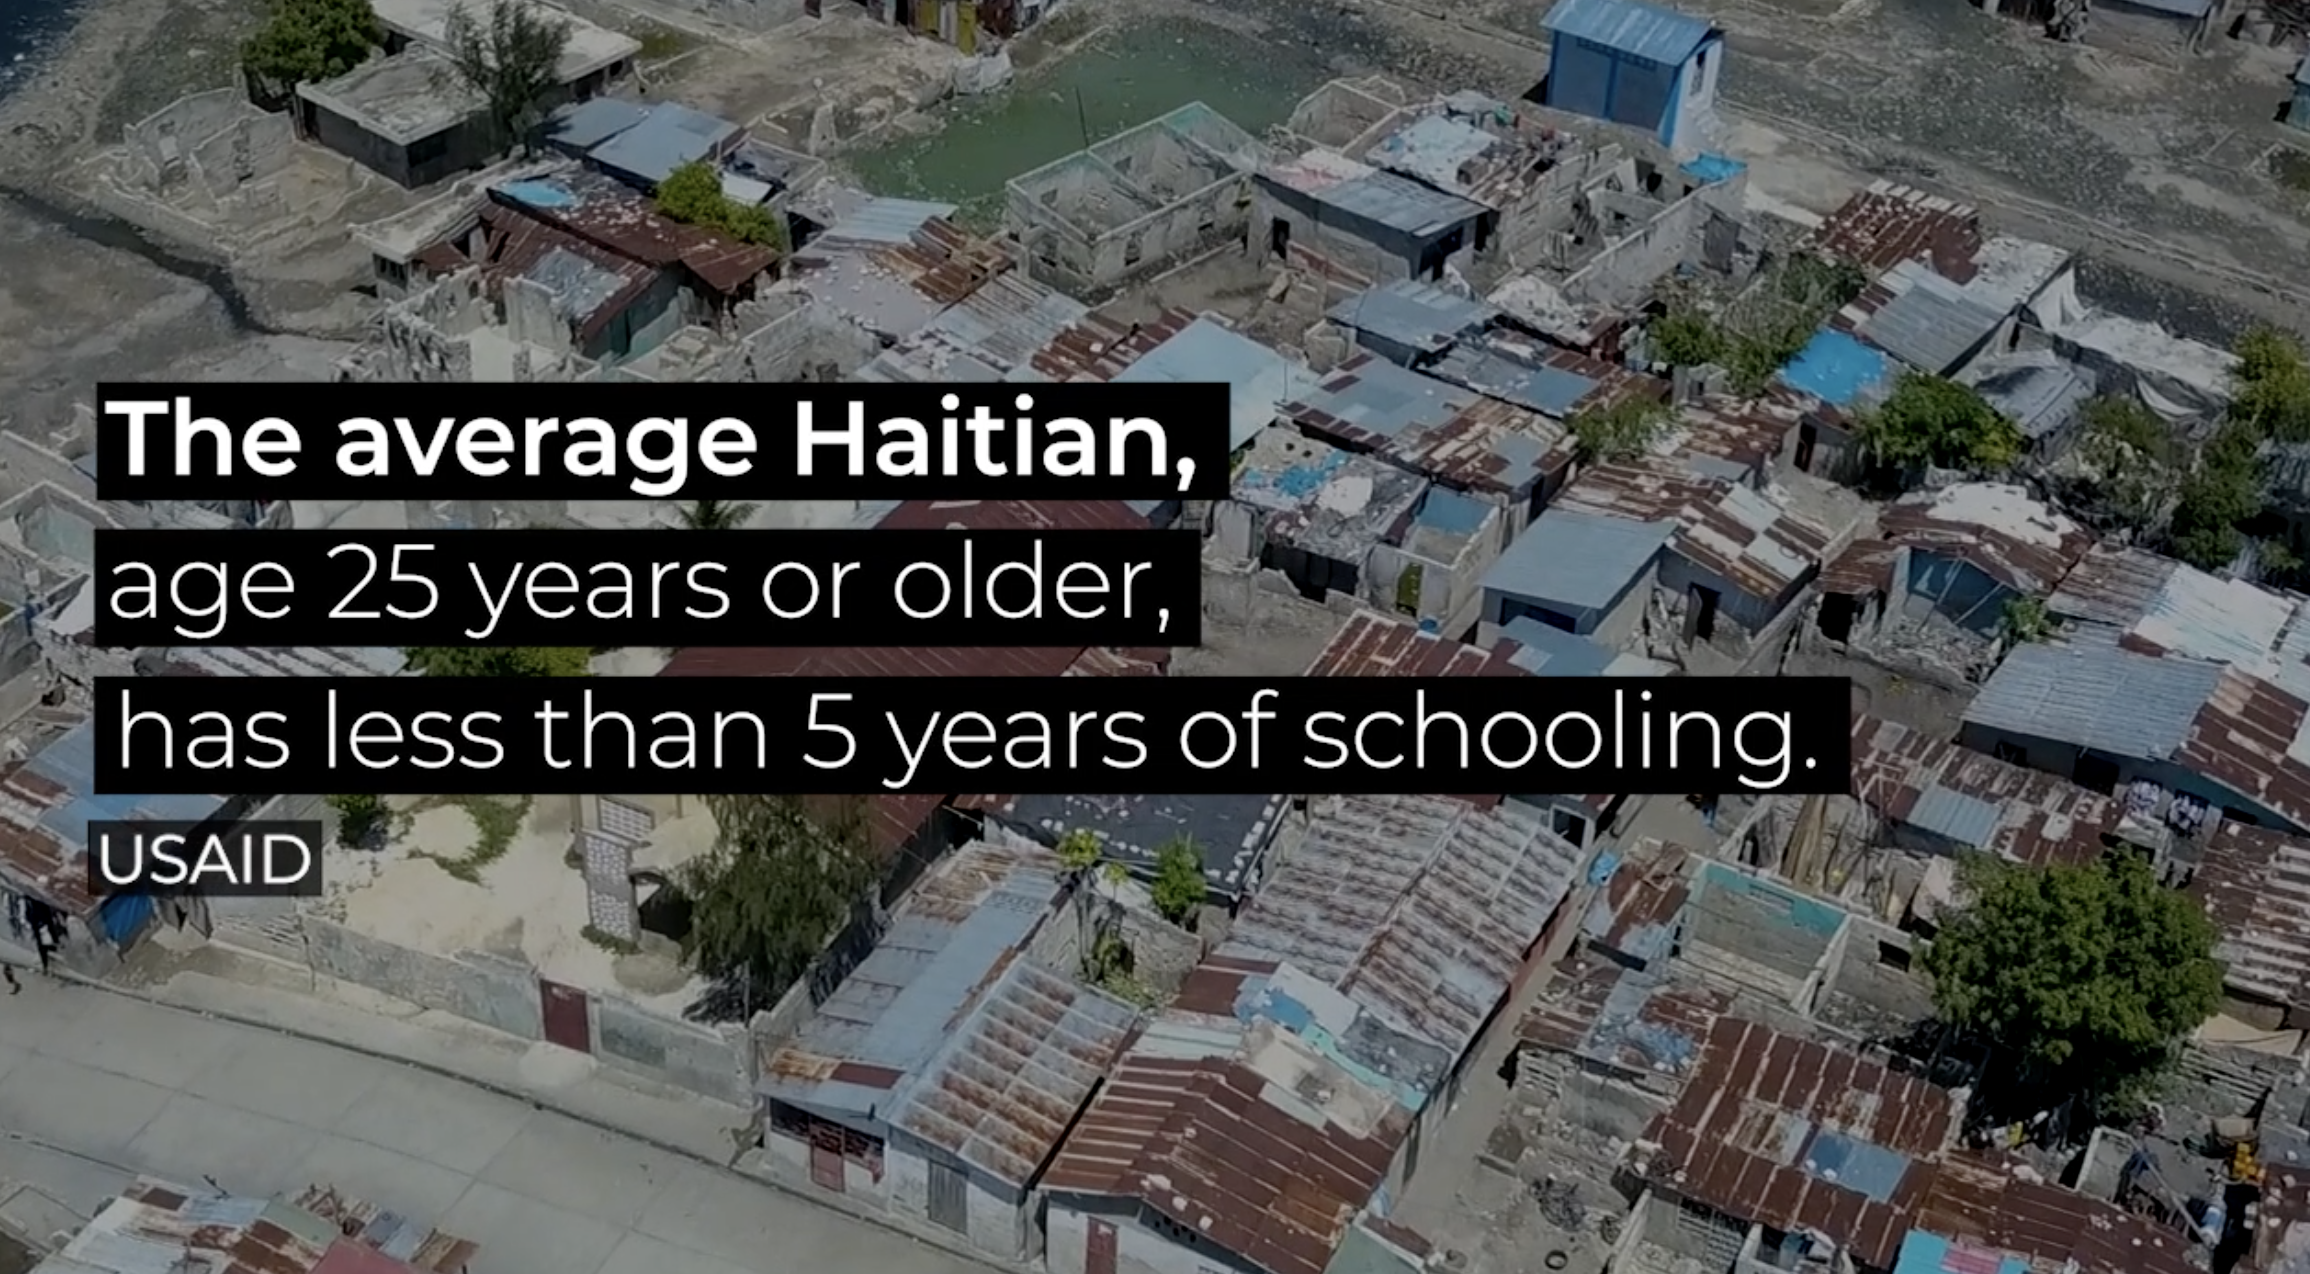 Learn More about Haiti